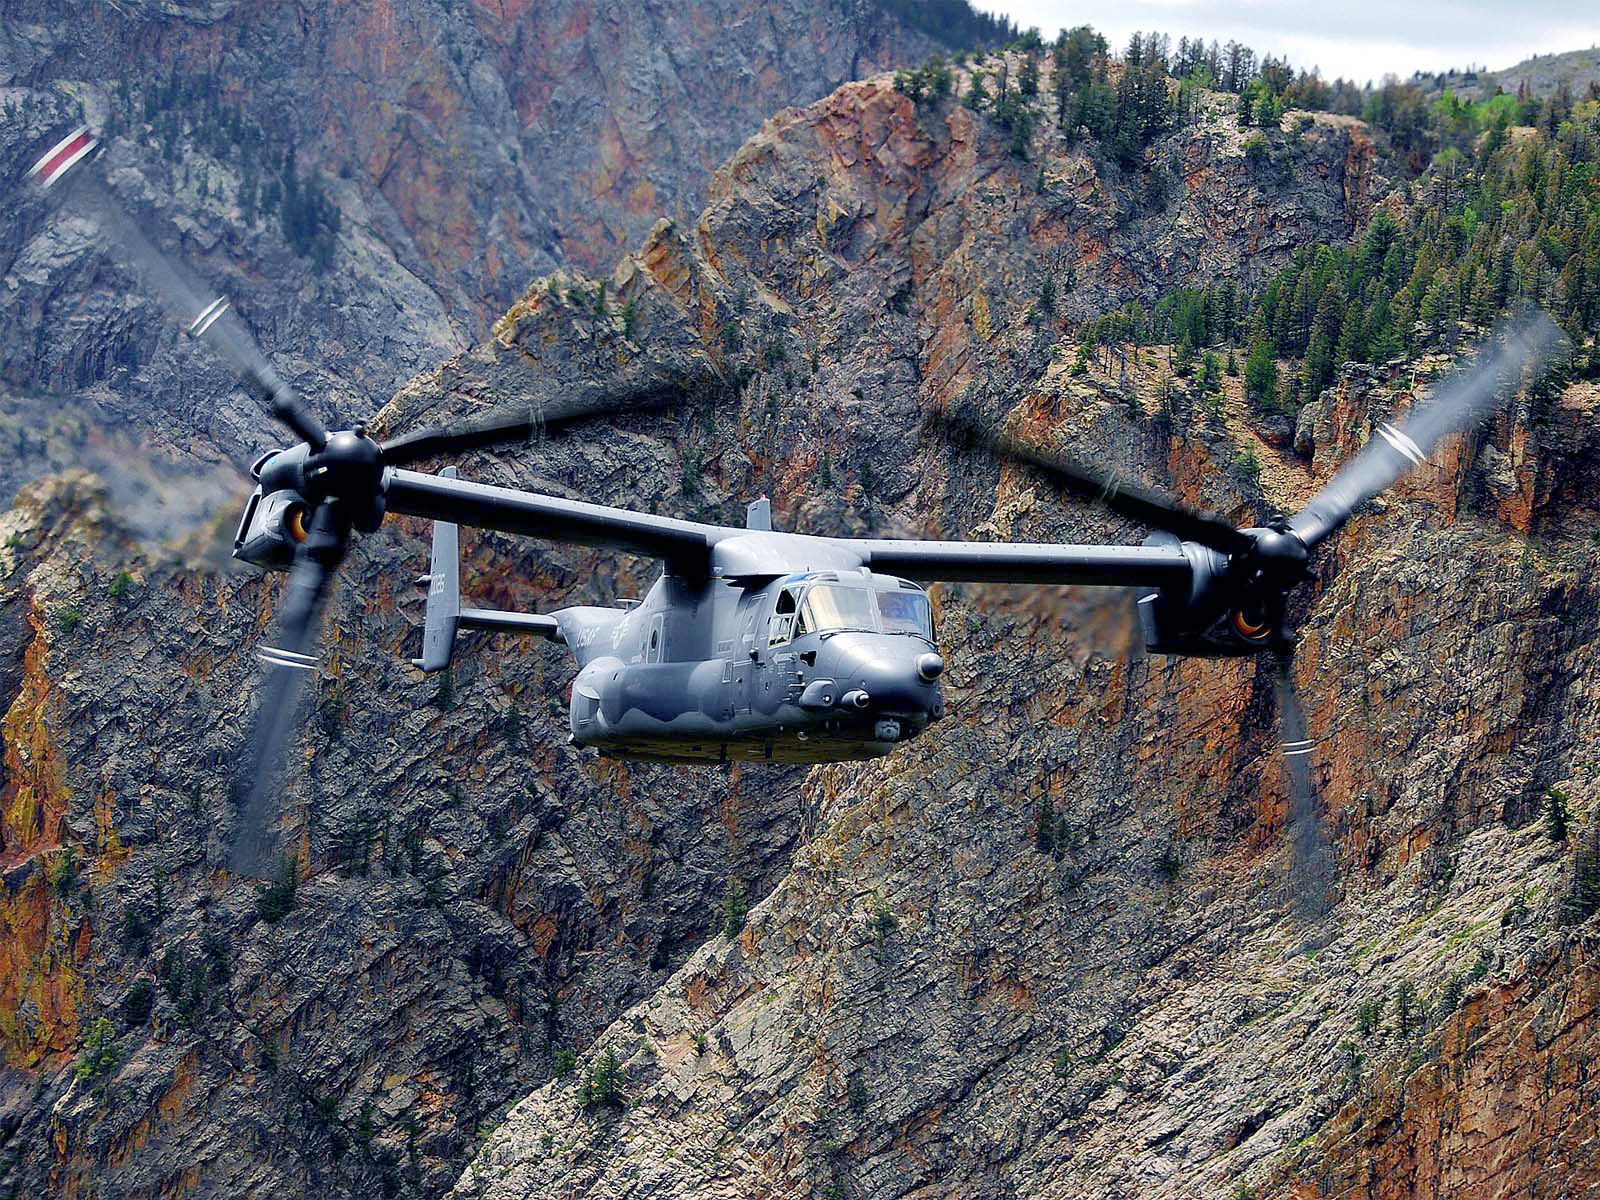 Free US Army Helicopter computer desktop wallpaper